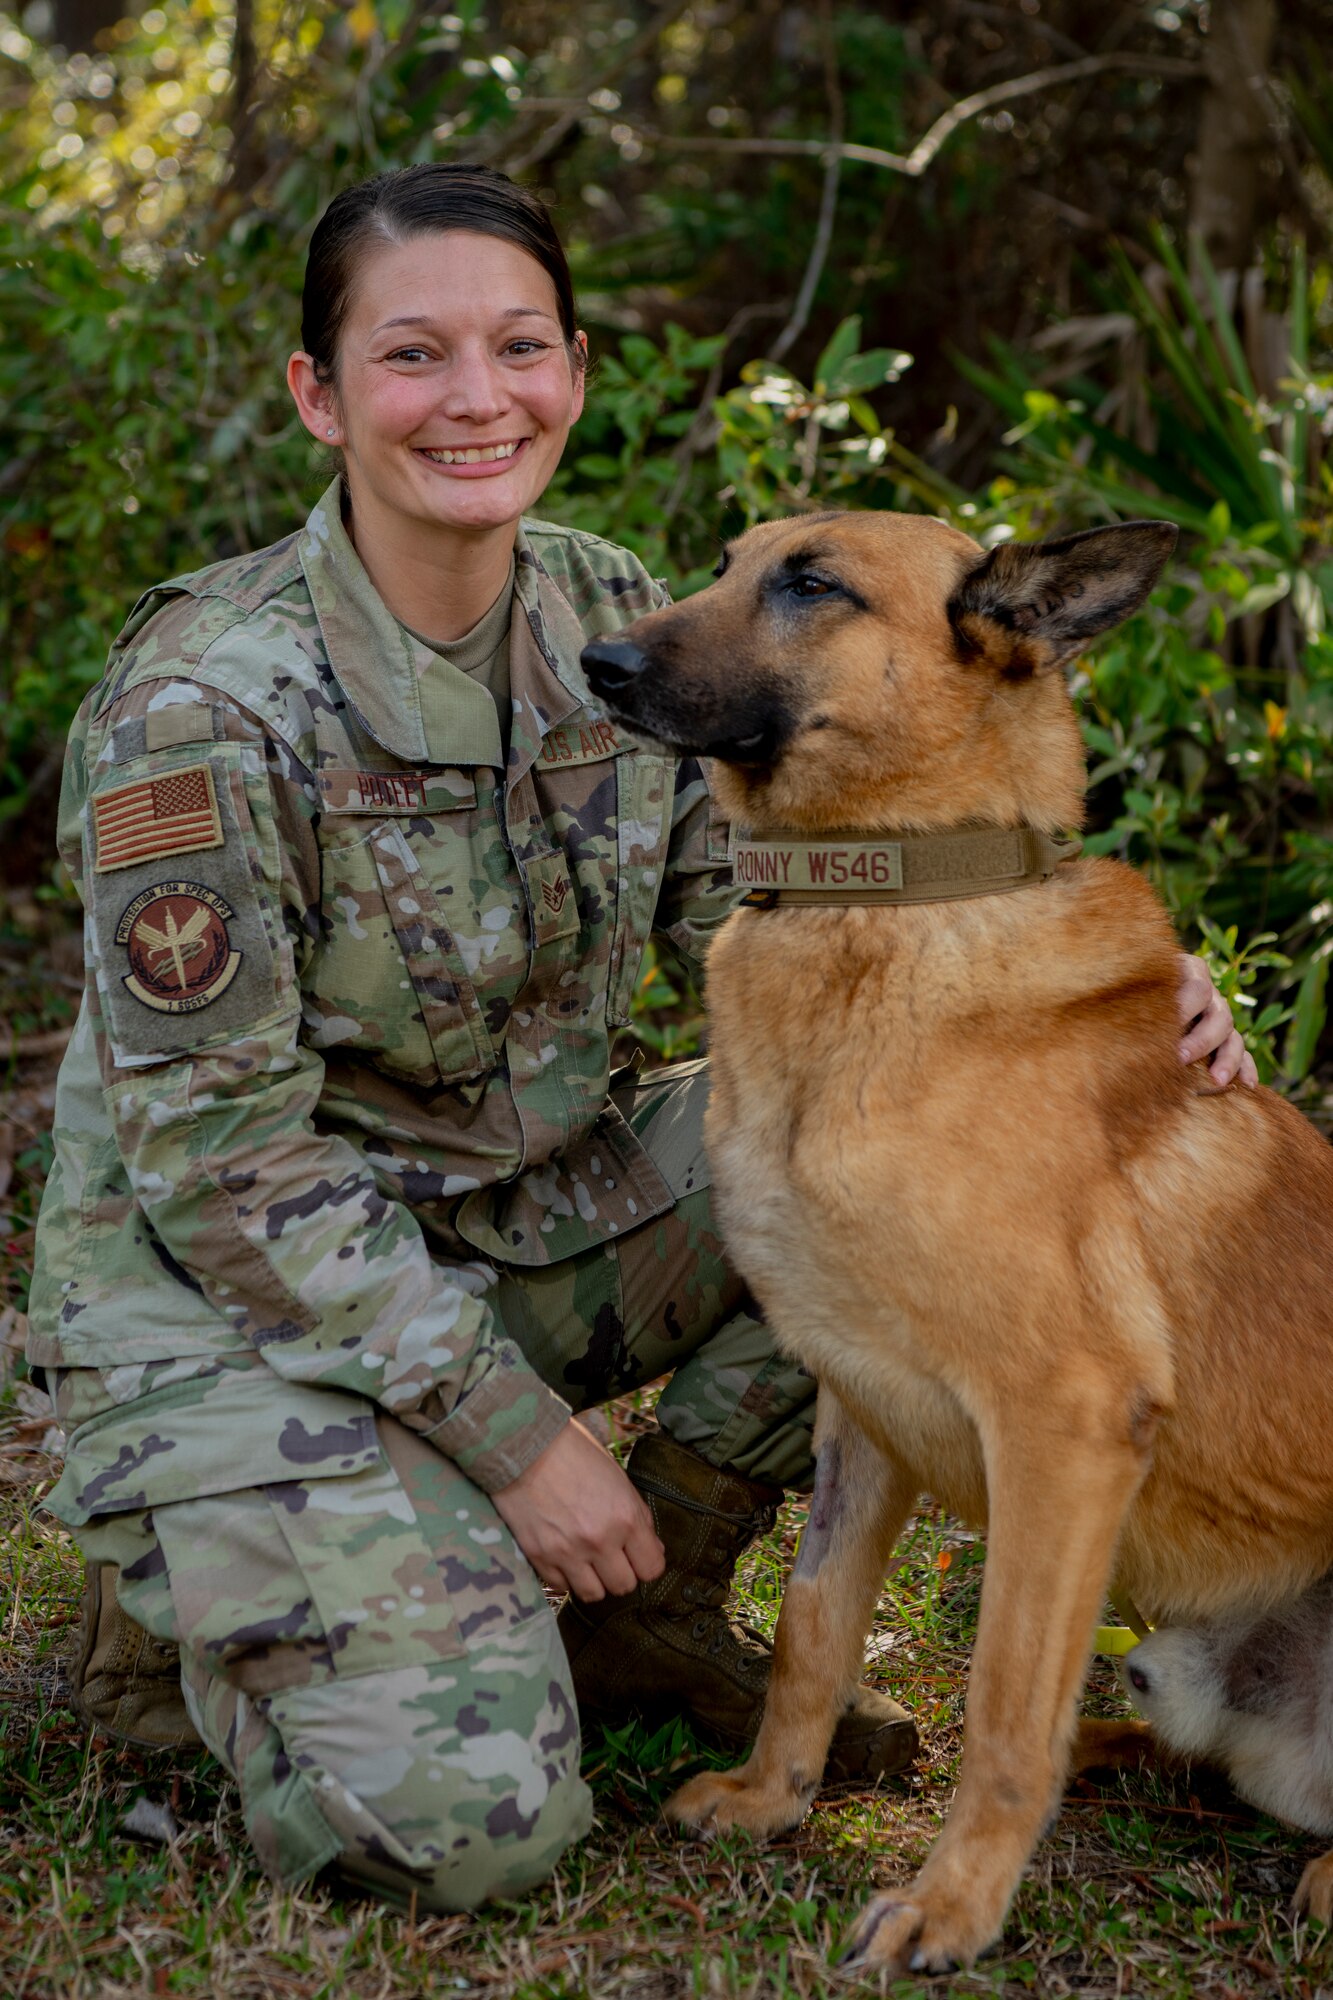 U.S. Air Force Staff Sgt. Jessica Poteet, a military working dog handler with 1st Special Operations Security Forces Squadron, poses with military working dog Ronnie at Hurlburt Field, Florida, March 16, 2021.